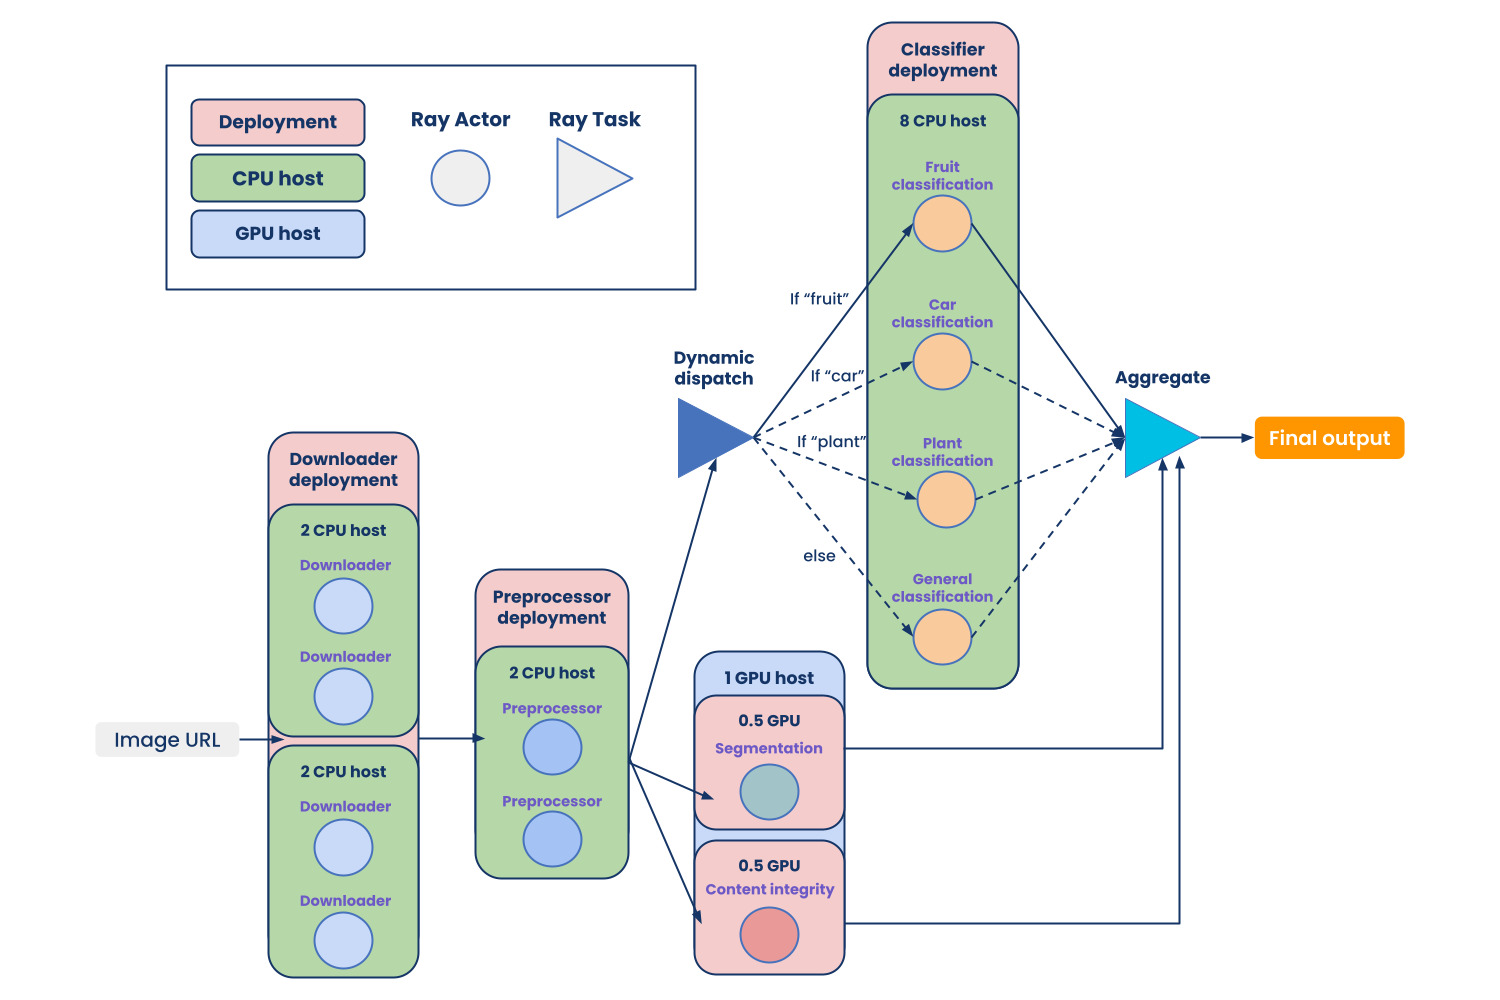 blog-deployment-graph-api-figure-6-scalable-image-processing-pipeline-for-content-understanding